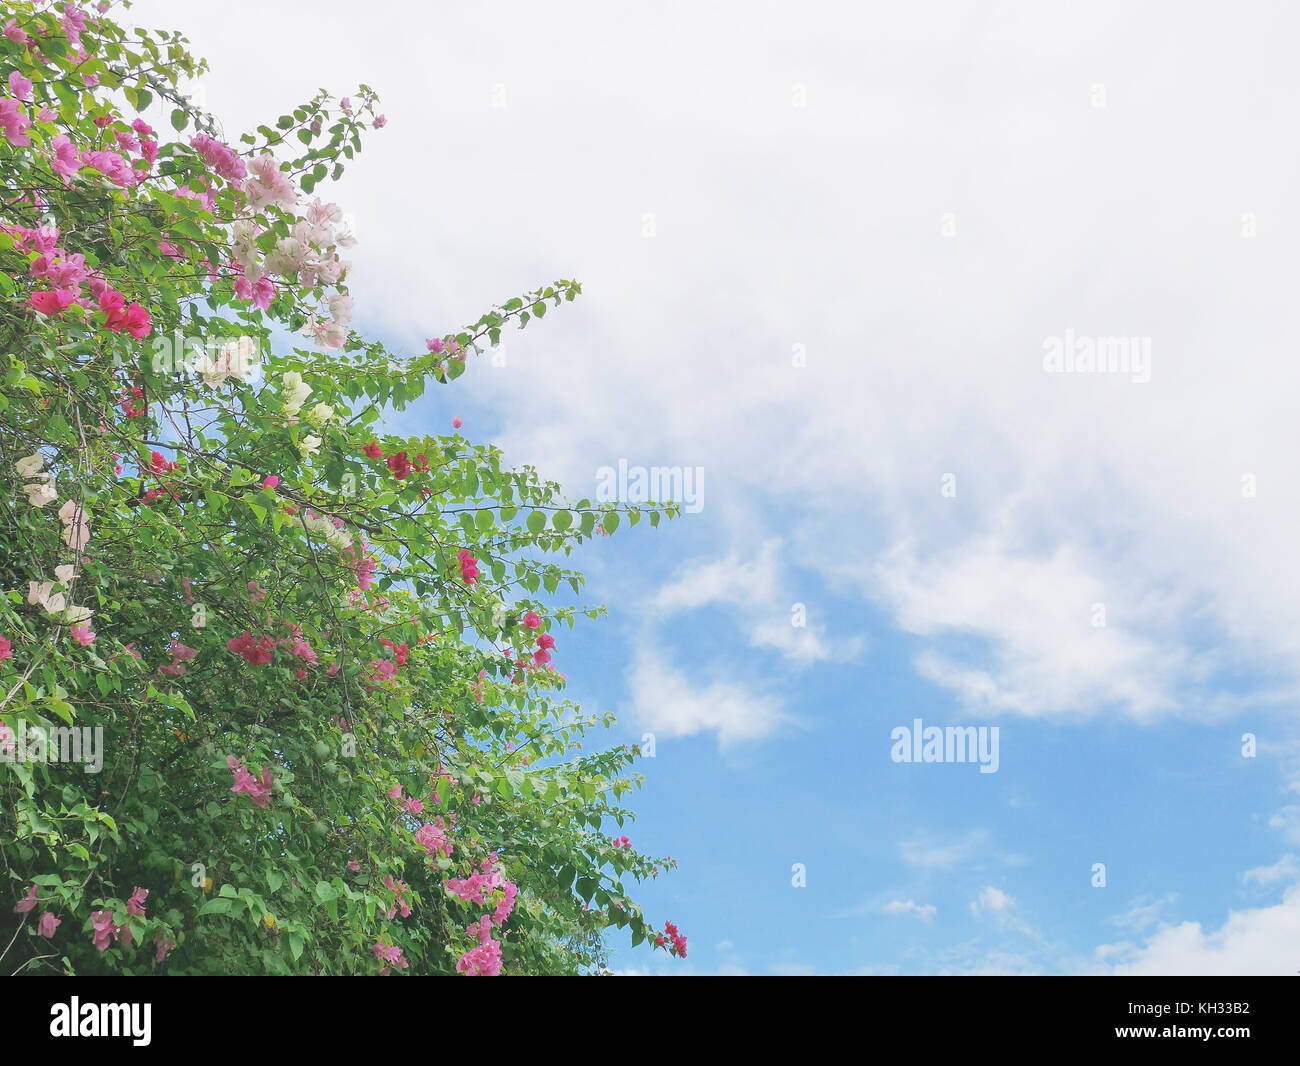 Bougainvillea tree with pink and white flower-like spring leaves from frog eye view with blue sky and white clouds as background. Bougainvillea is tho Stock Photo